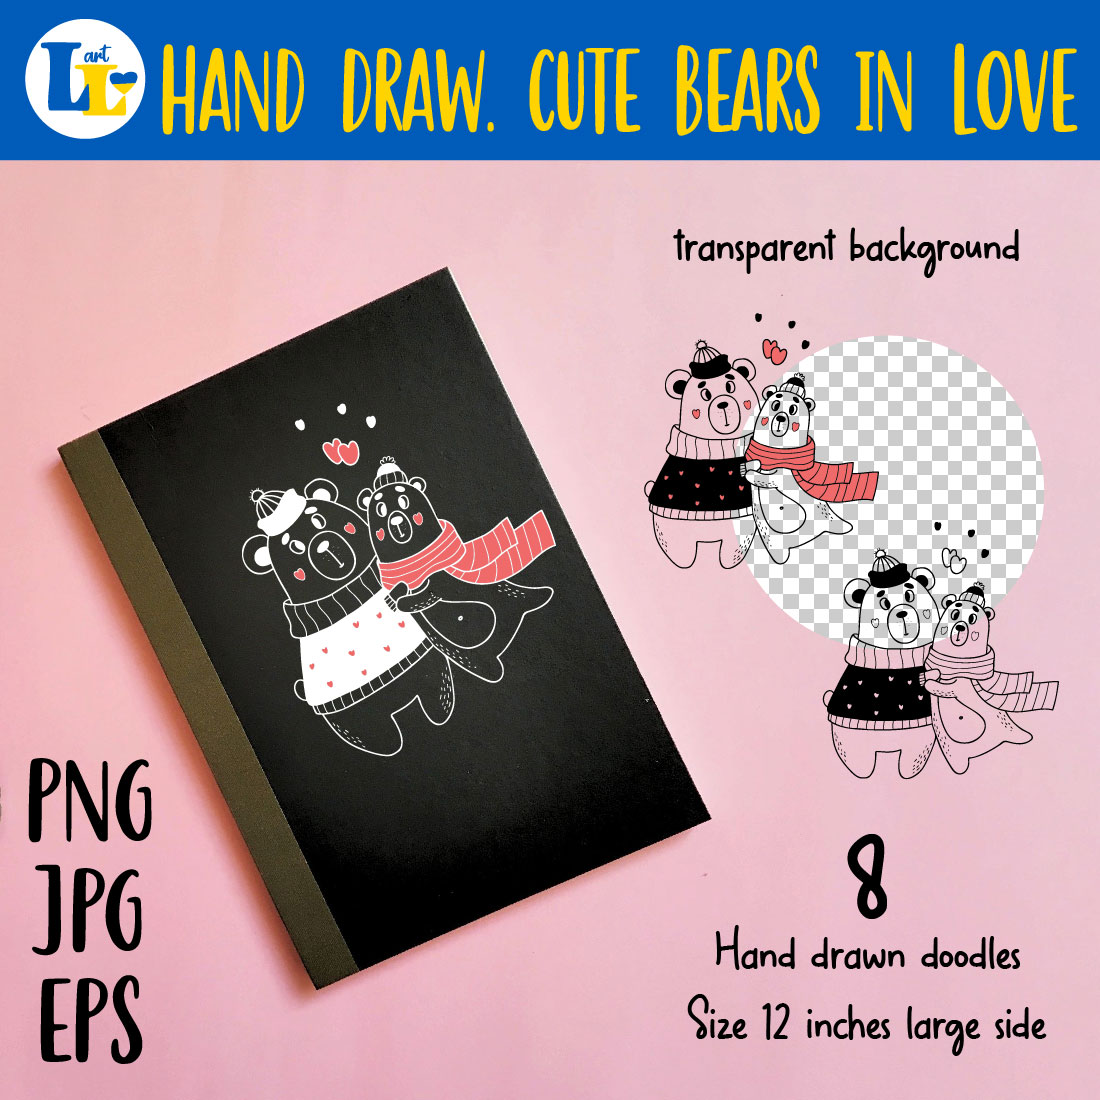 Cute in Love Bears Doodle. Hand-Drawn Doodle Valentine Icons cover image.